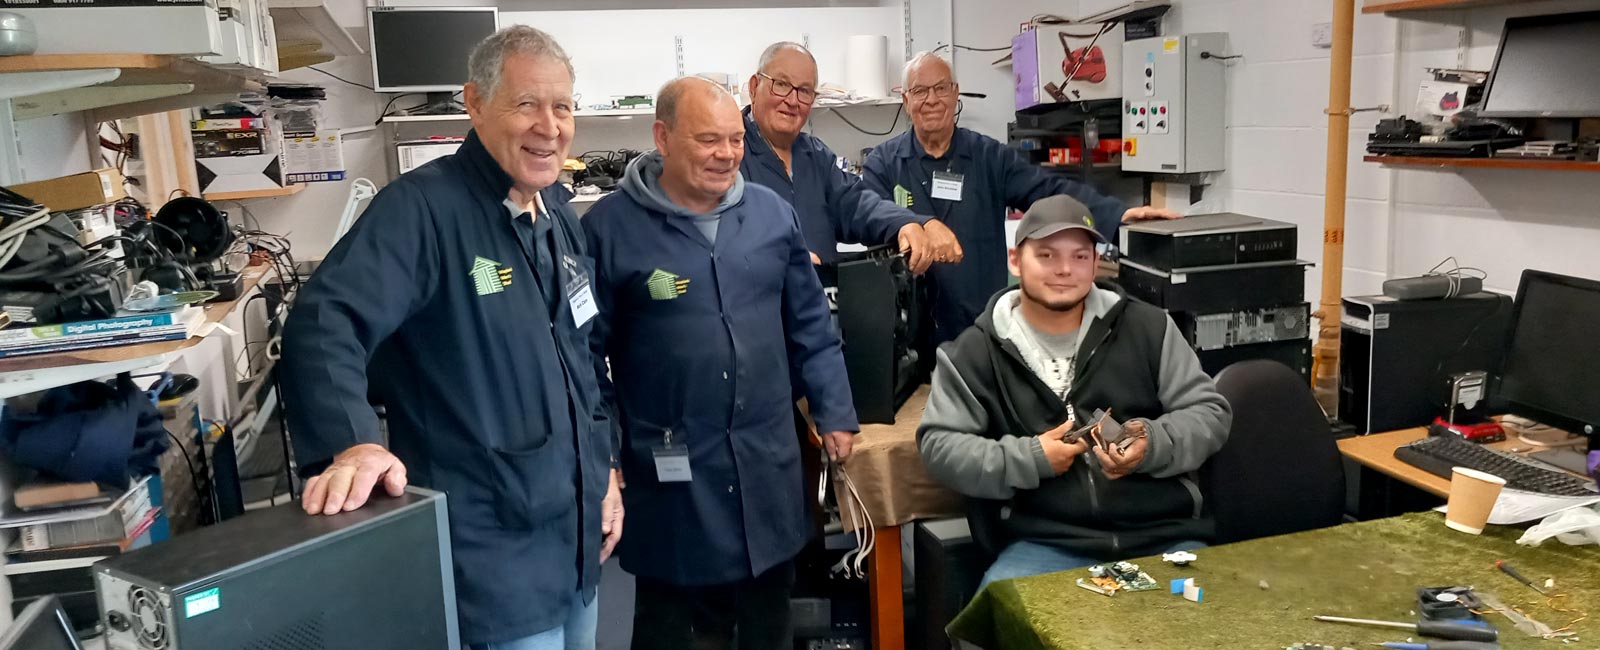 The Watton Men’s Shed.